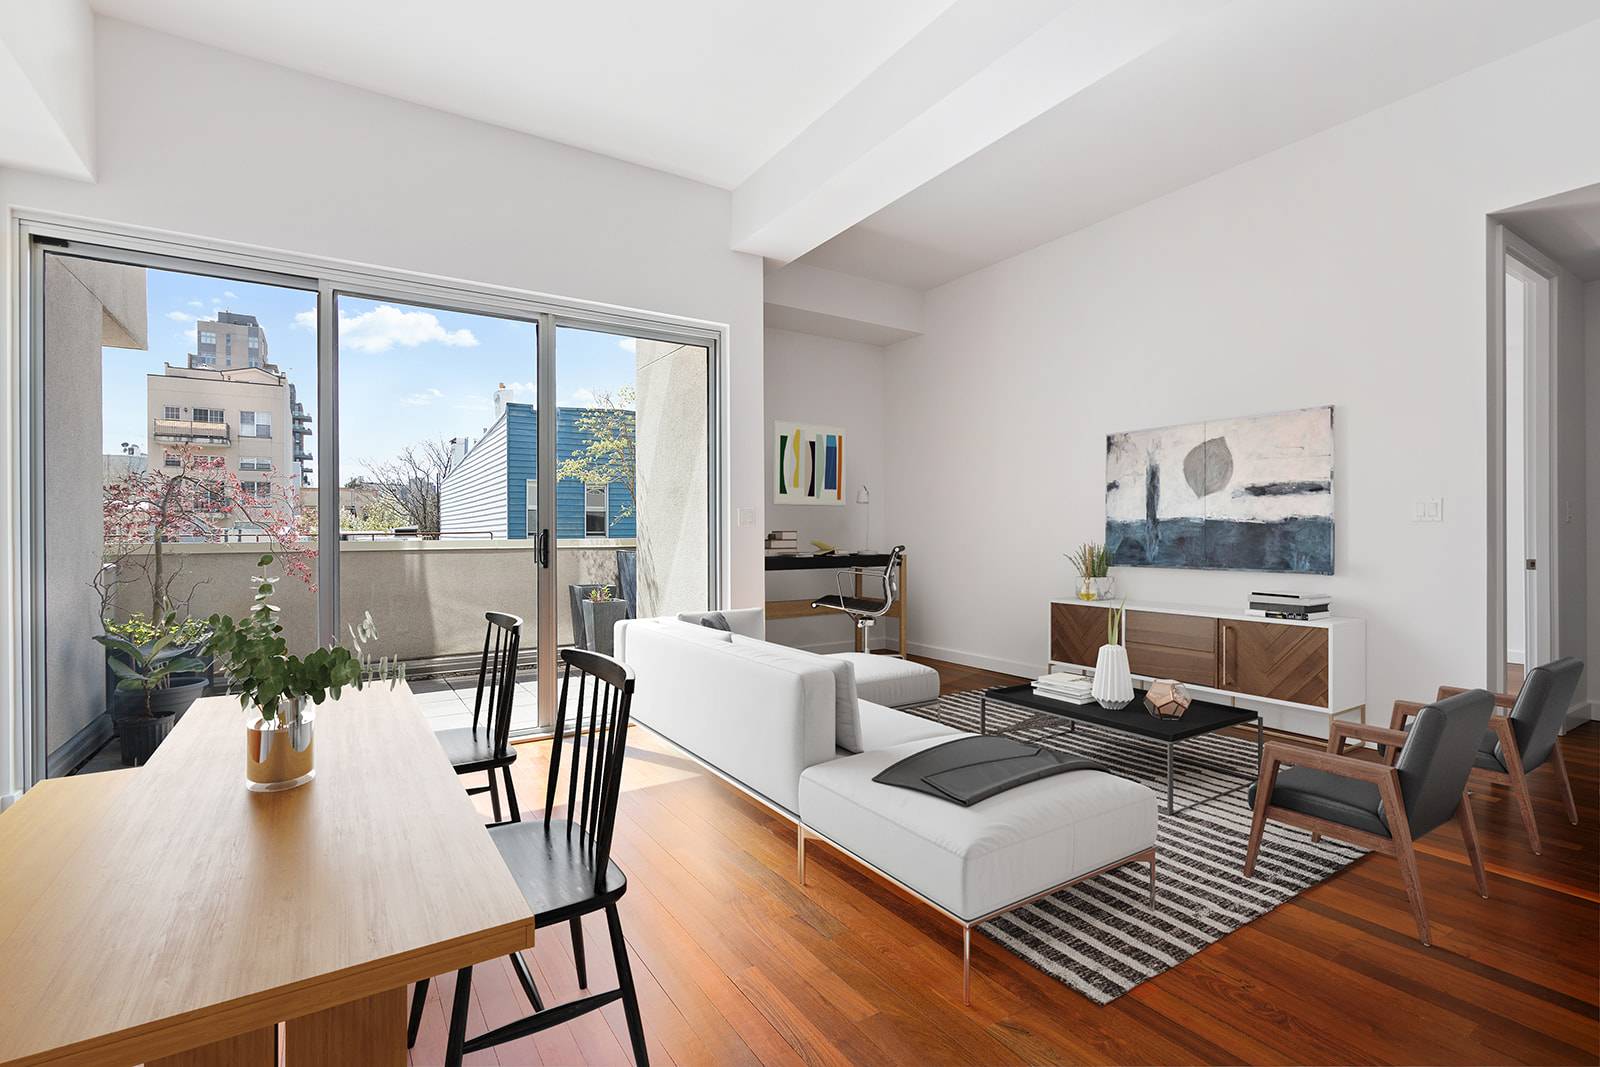 125 NORTH 10TH STREET, APT S3G, PRIME WILLIAMSBURG SPACIOUS BRIGHT SOUTHERN EXPOSURE W D TERRACE FIRST SHOWING AT THE OPEN HOUSE BY APPOINTMENT ONLY This is a rare opportunity to ...